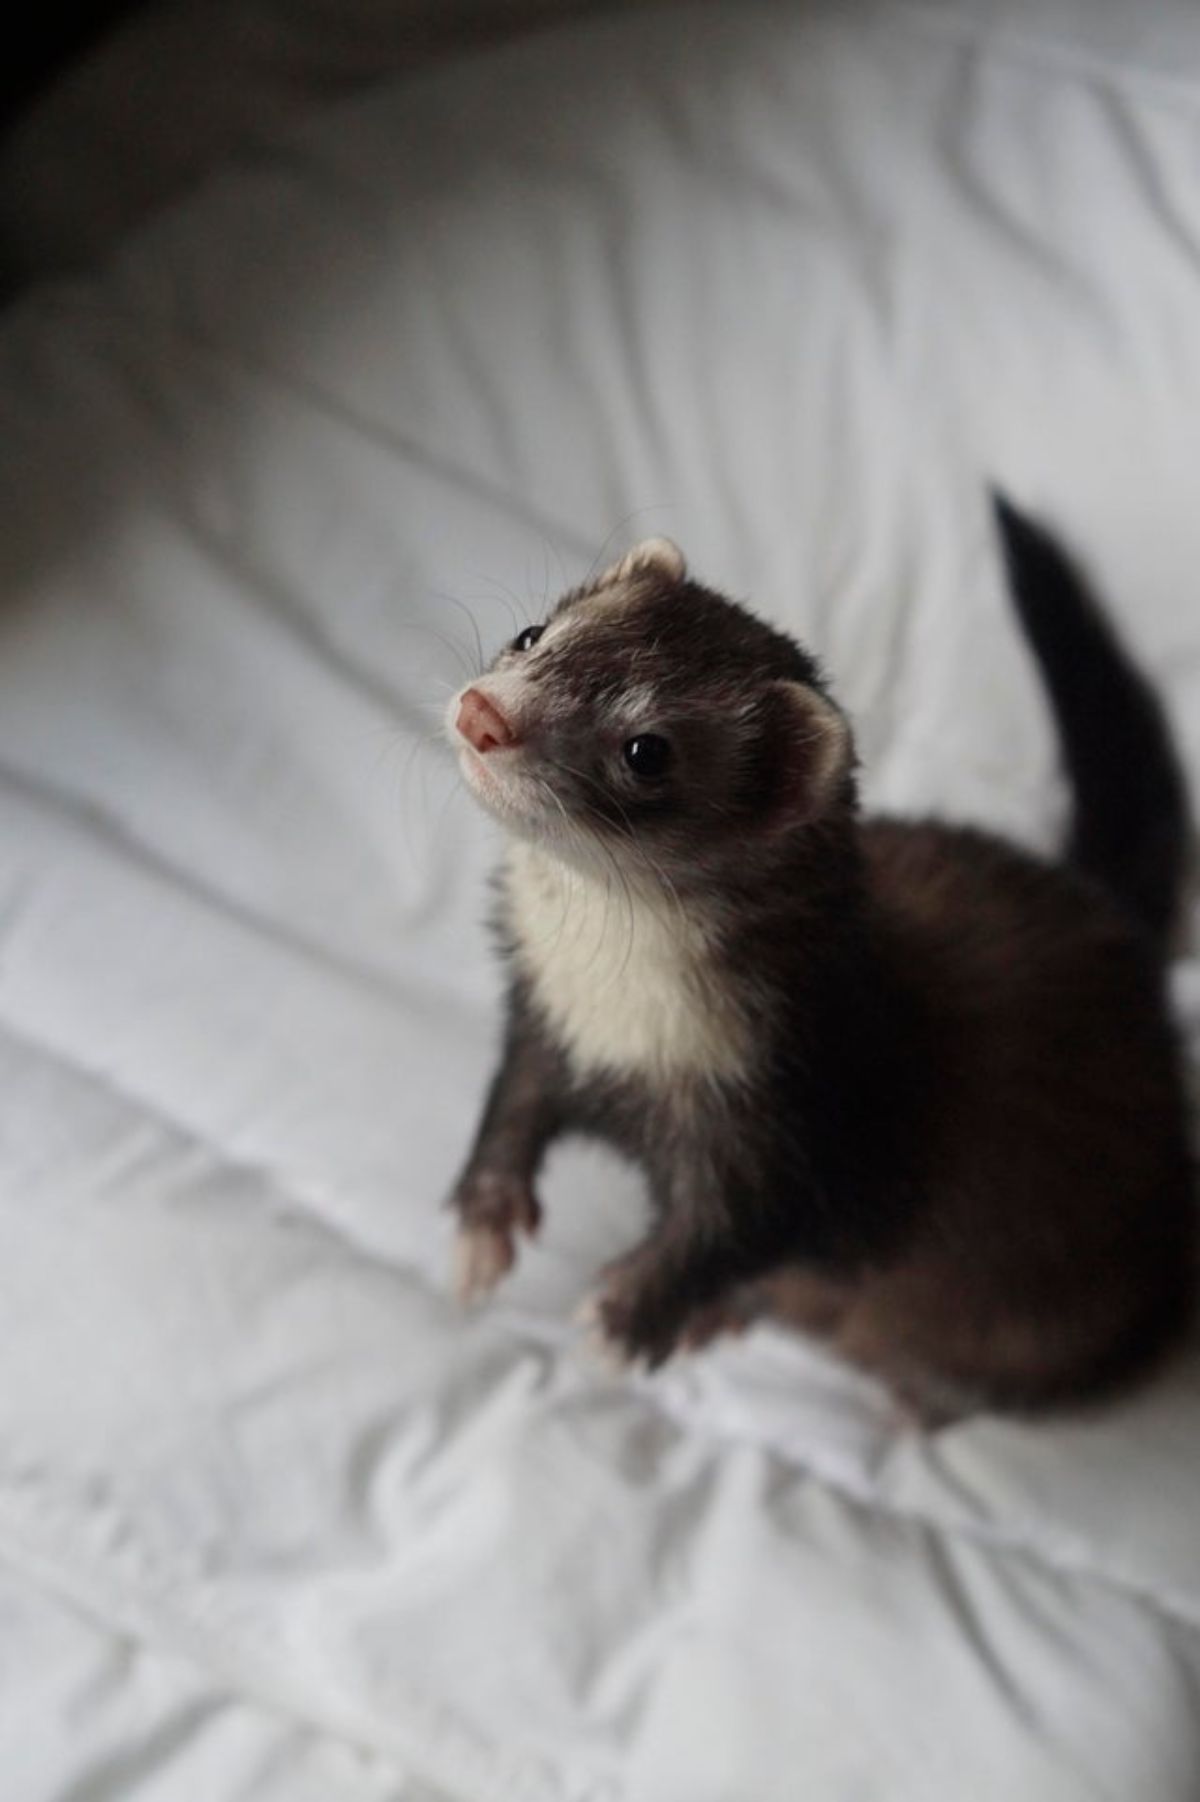 brown and white ferret standing on hind legs on white bed looking up